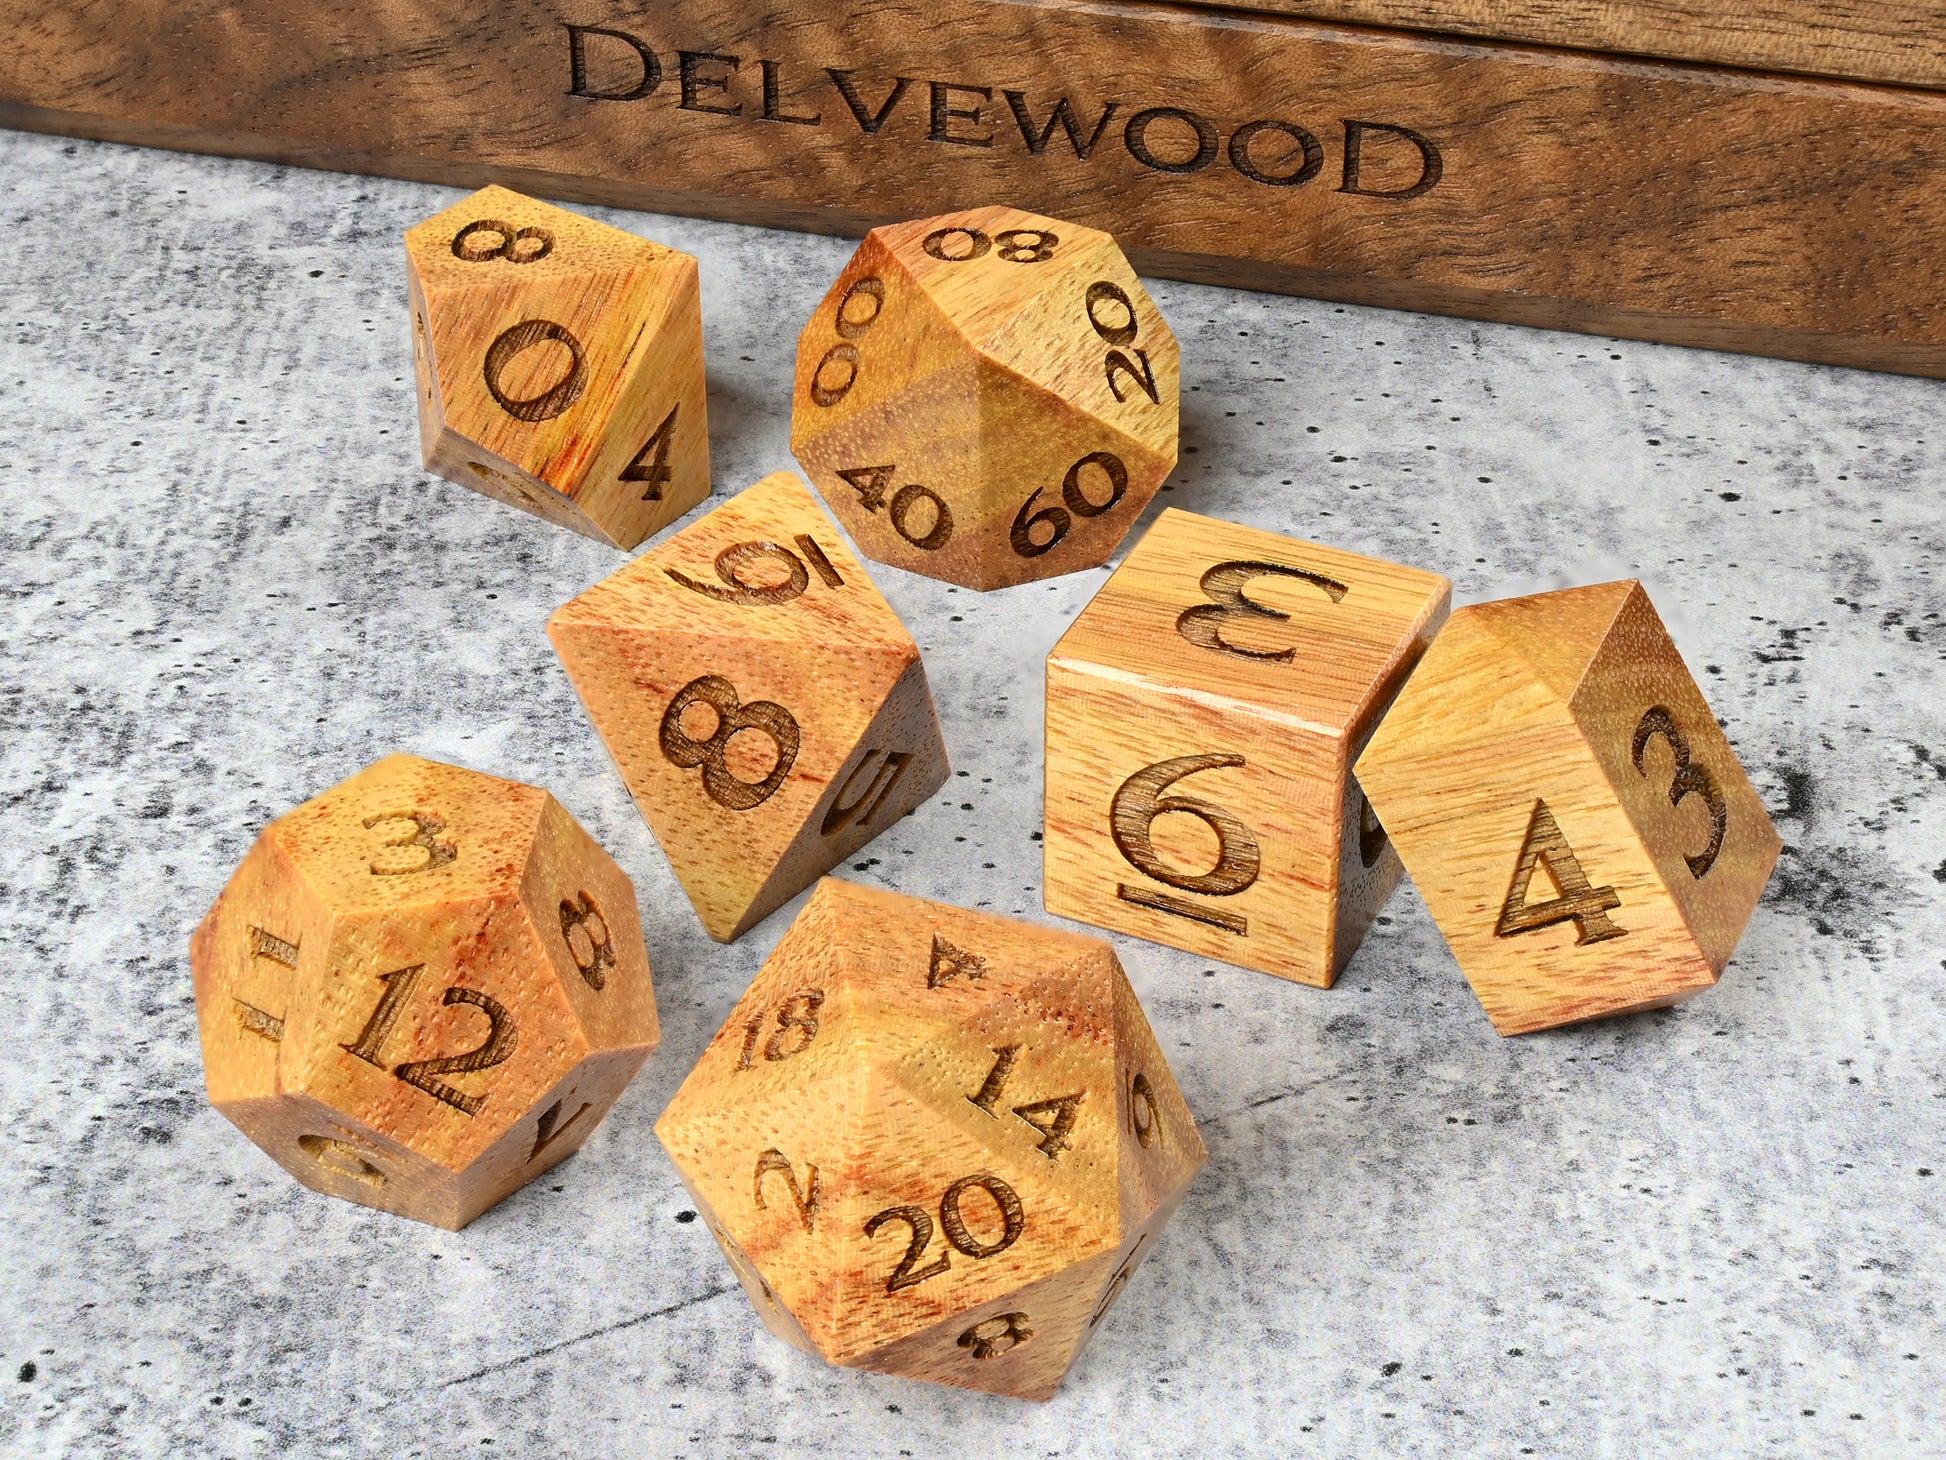 Canarywood dice set for dnd rpg tabletop gaming in front of Delvewood delver's kit dice box.